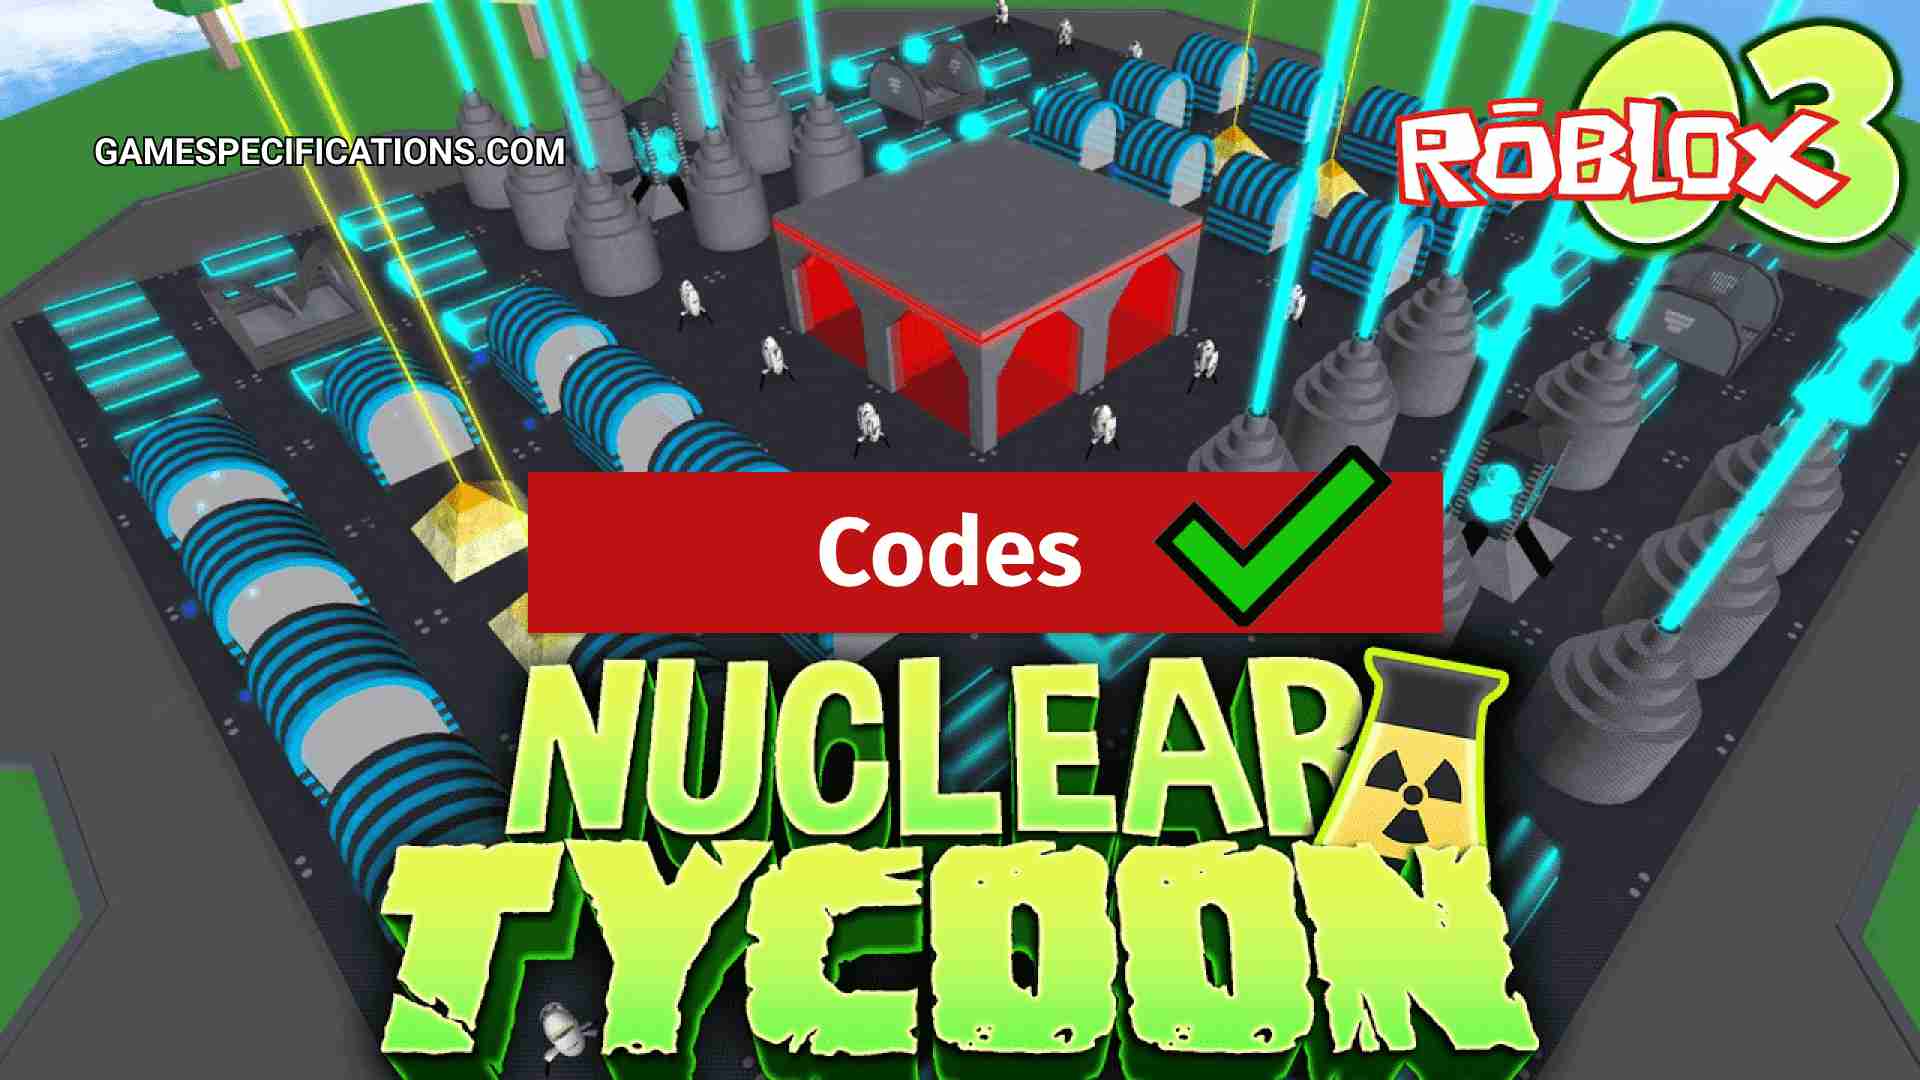 Roblox Nuclear Plant Tycoon Codes July 2021 Game Specifications - business simulator roblox youtube